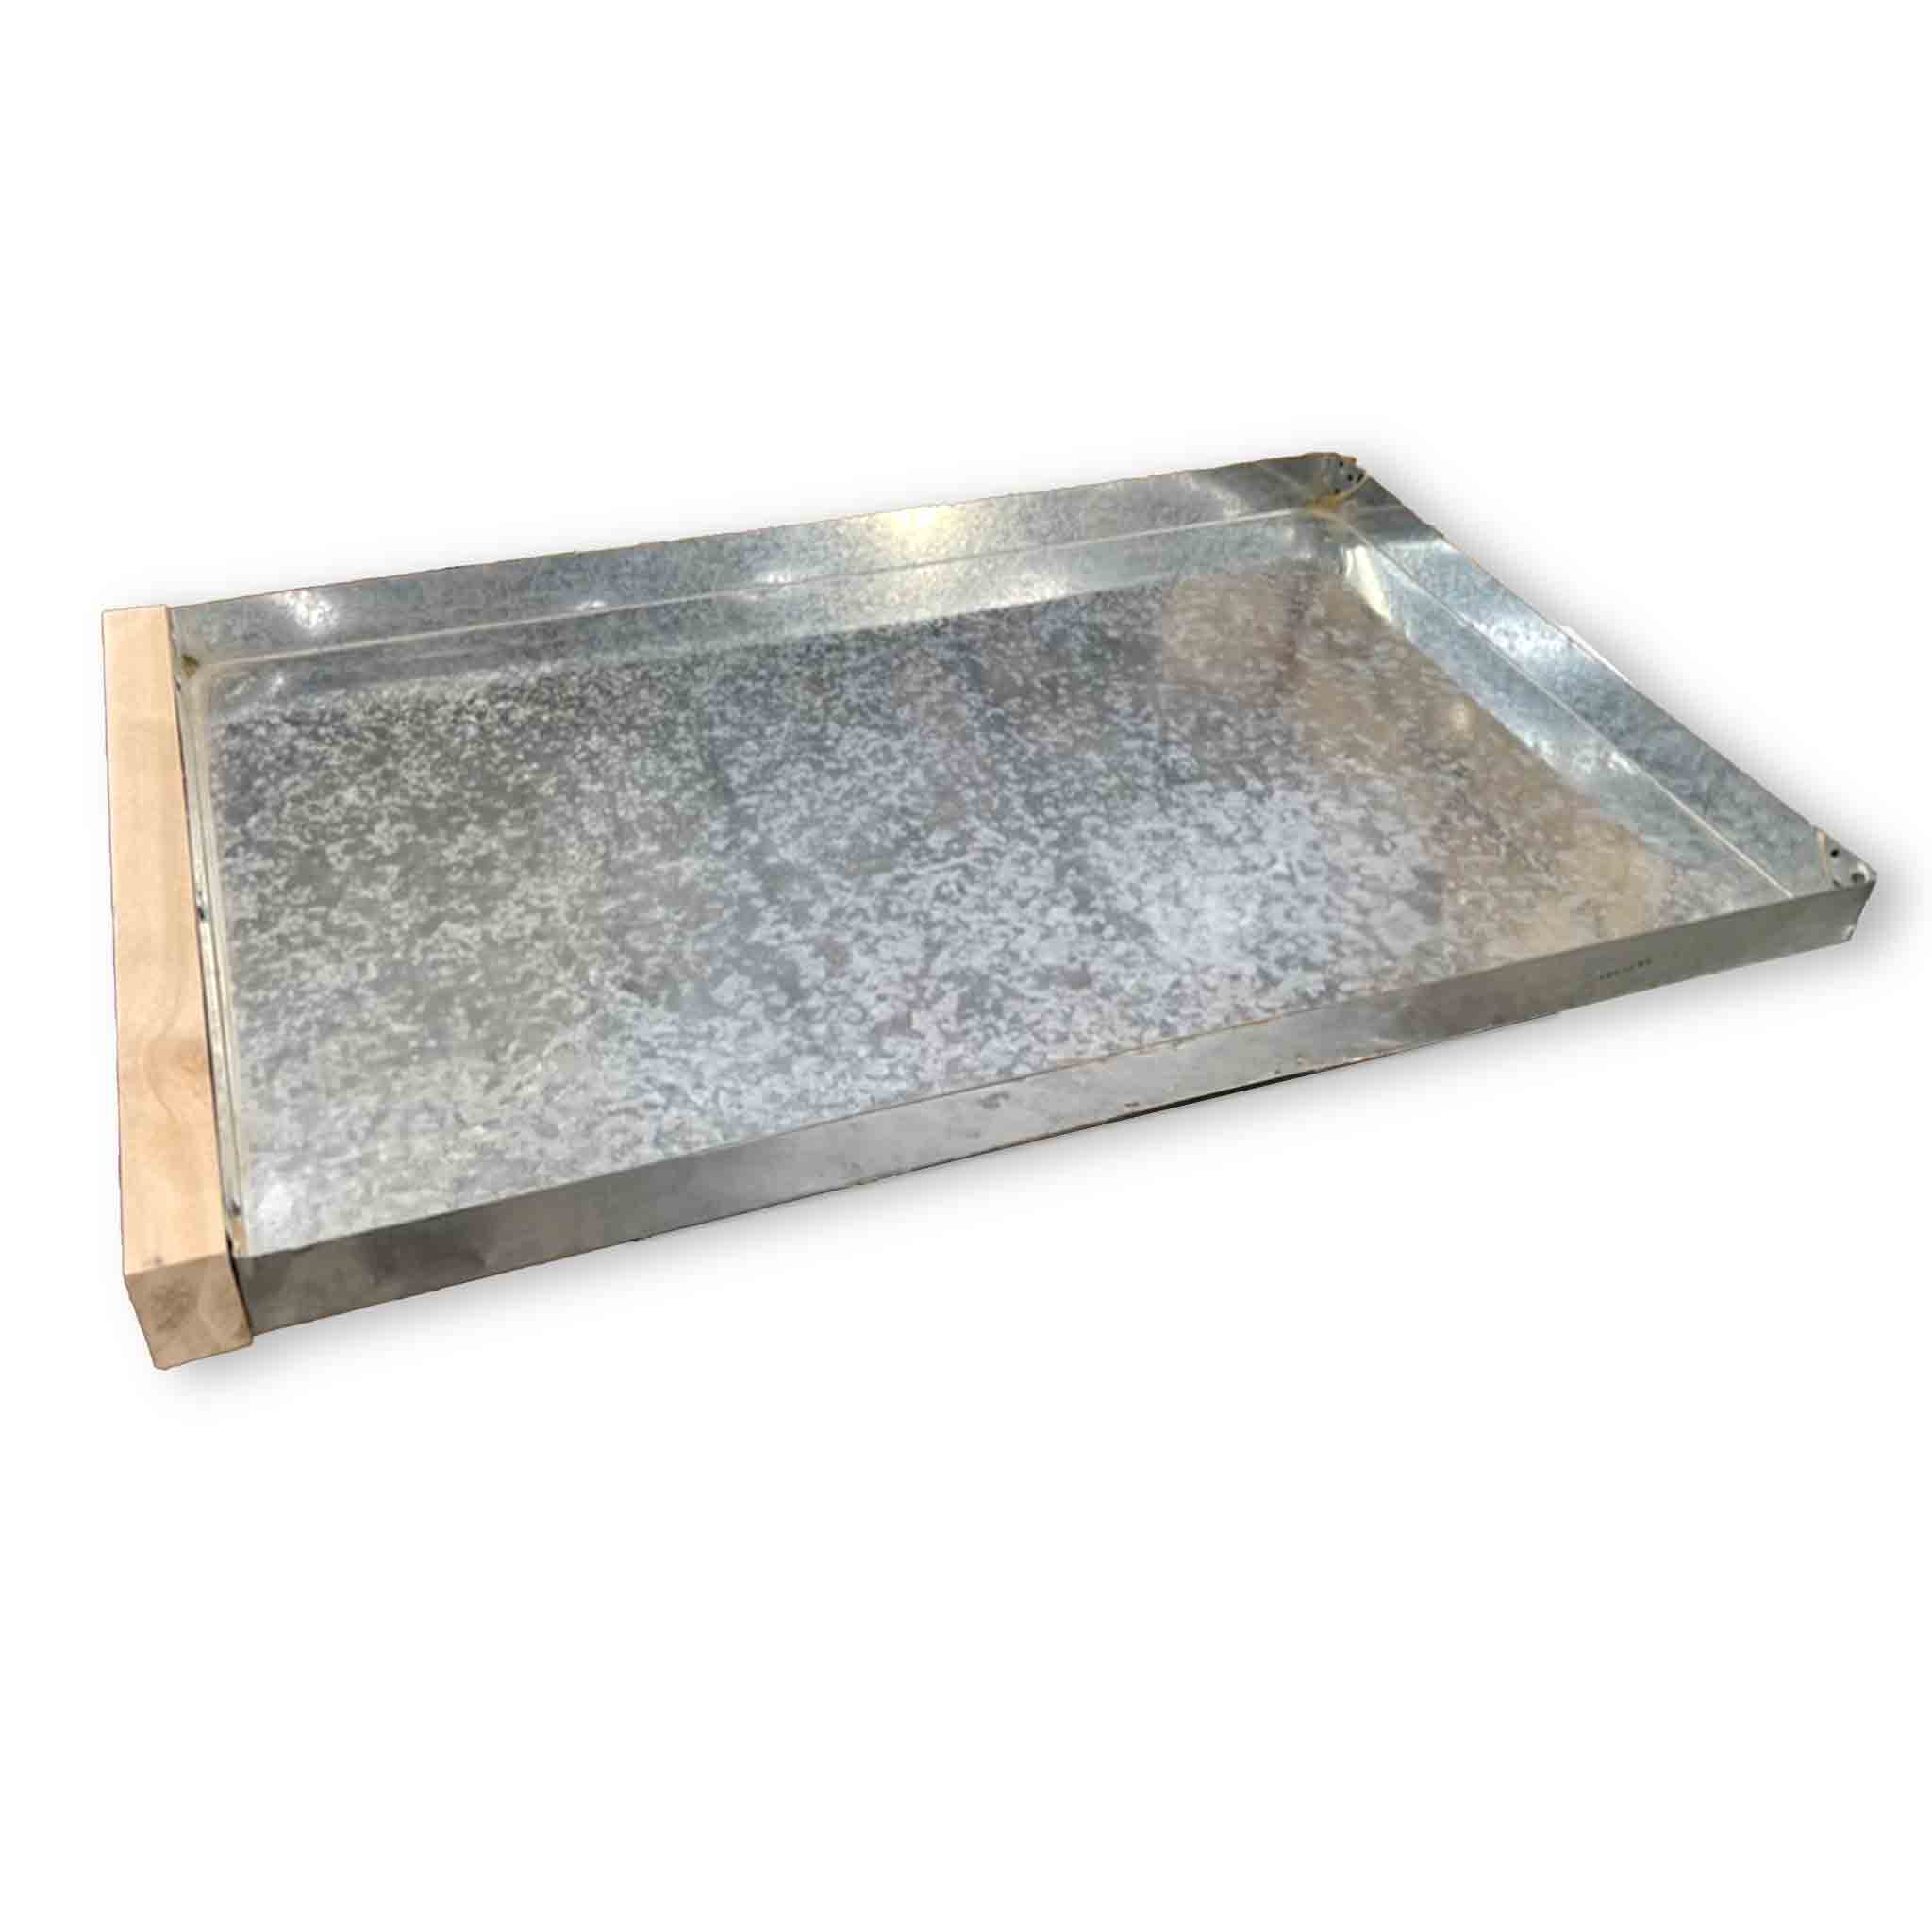 Screened Ventilation Bottom Board with Metal Pest Control Draw Tray - Floors collection by Buzzbee Beekeeping Supplies